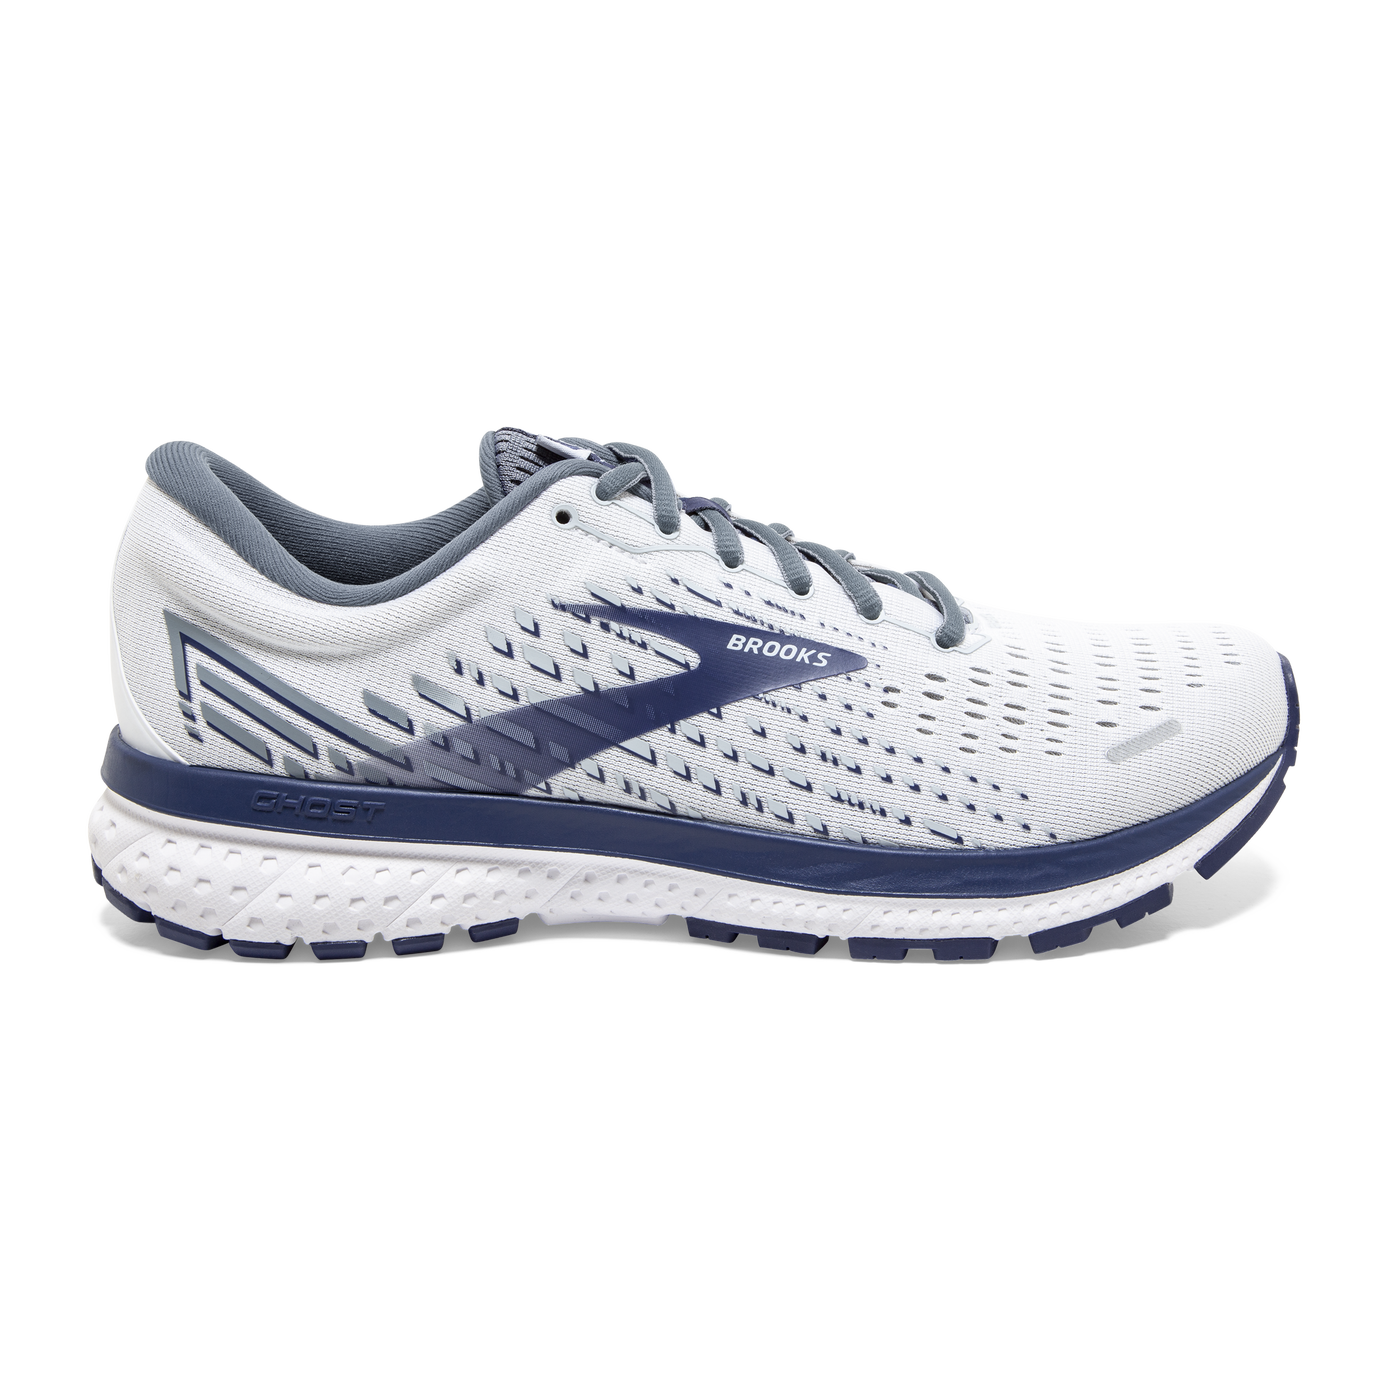 Brooks Ghost 13 Navy White Men Neutral Cushion Road Running Shoes 1103481D474